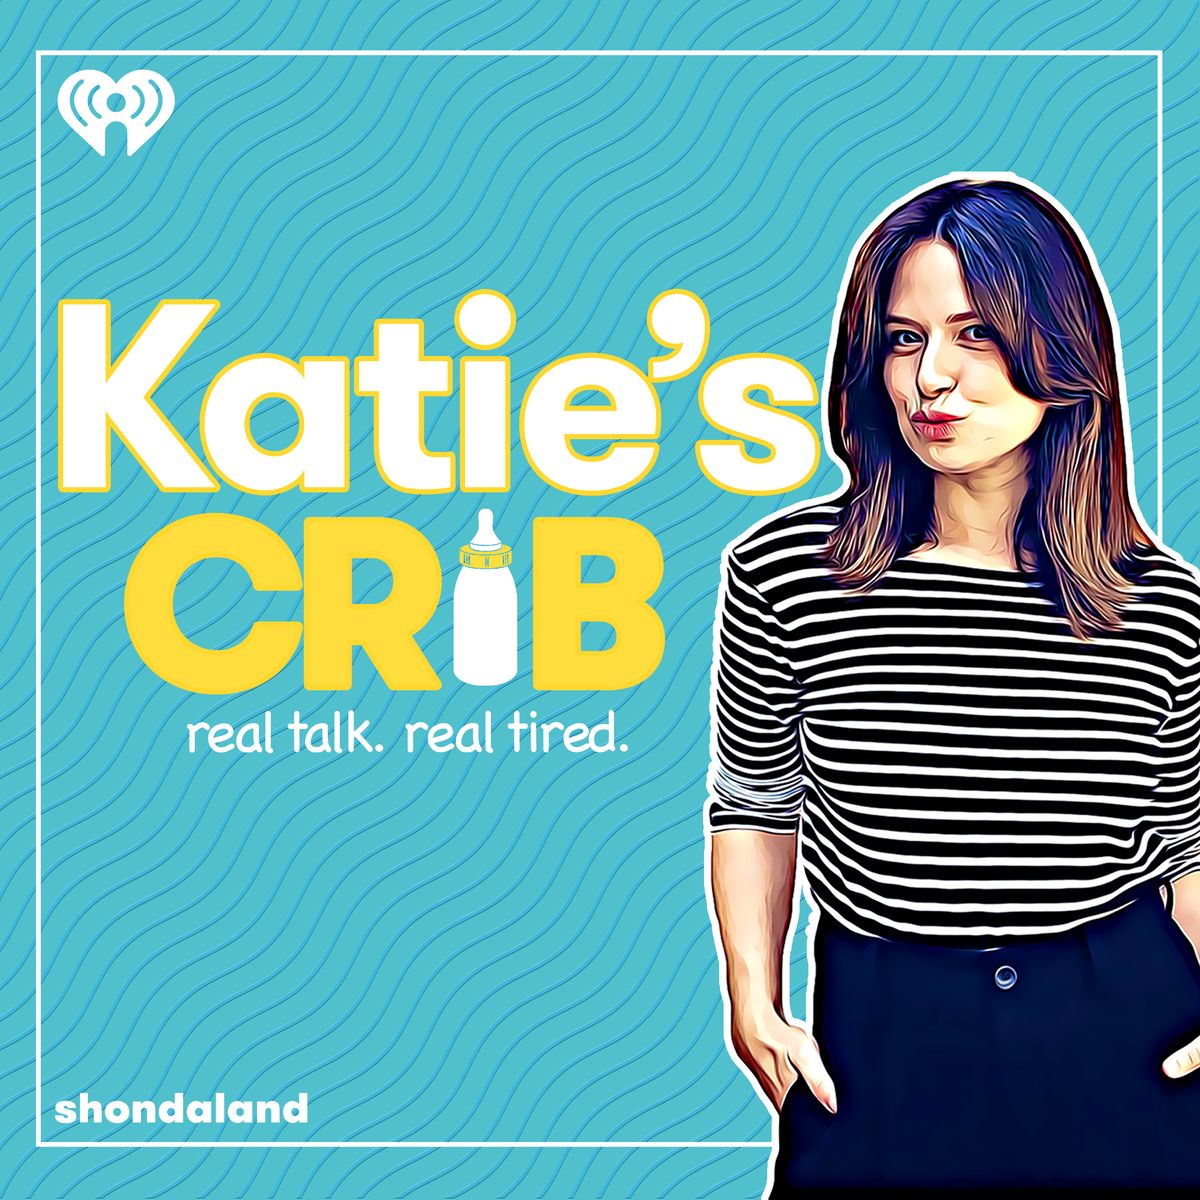 katie lowes for the third season of her podcast, "katie's crib"